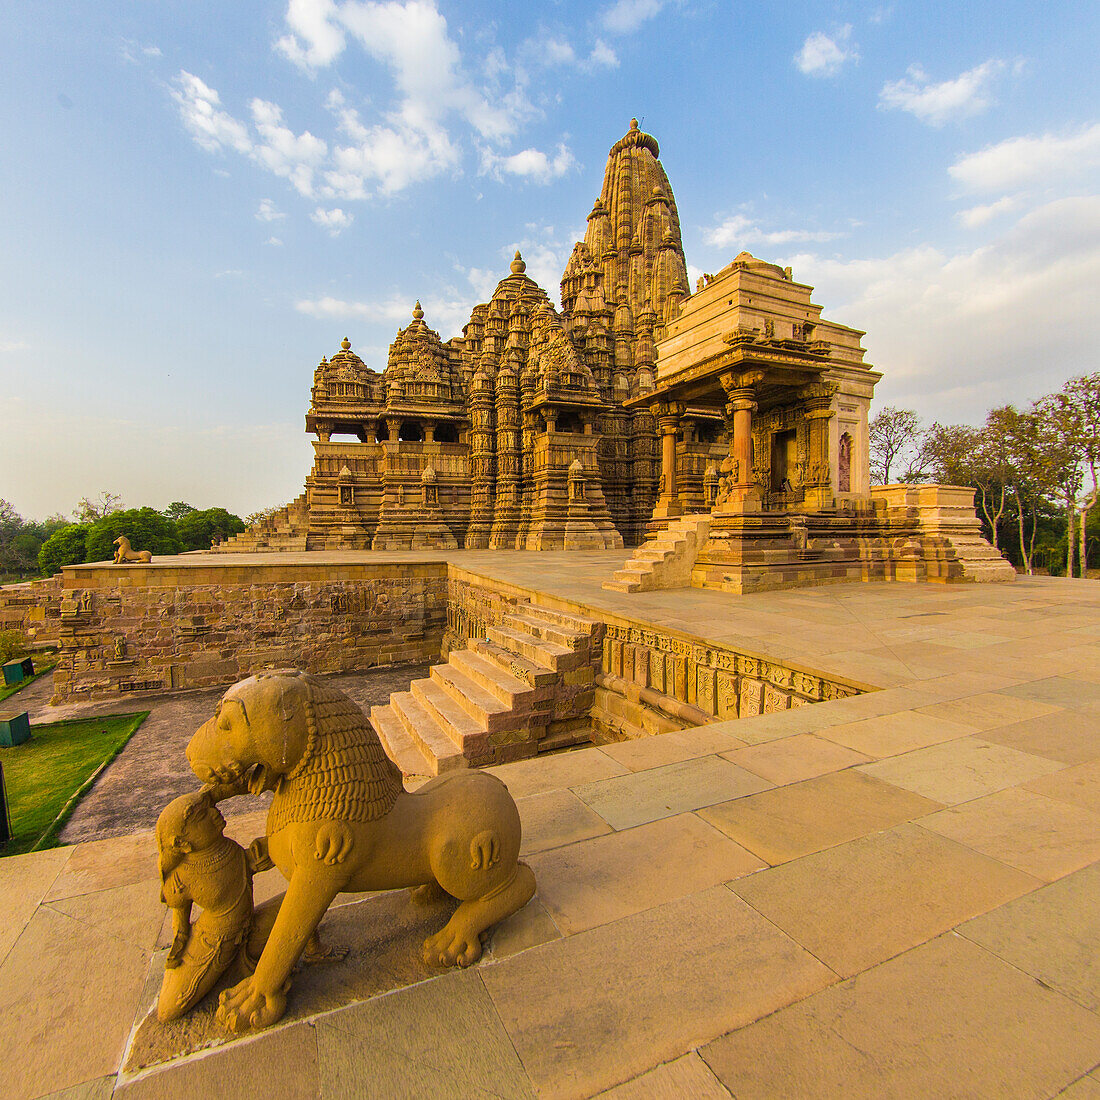 India. Hindu temples at Khajuraho, UNESCO World Heritage Site, famous for their erotic carvings.